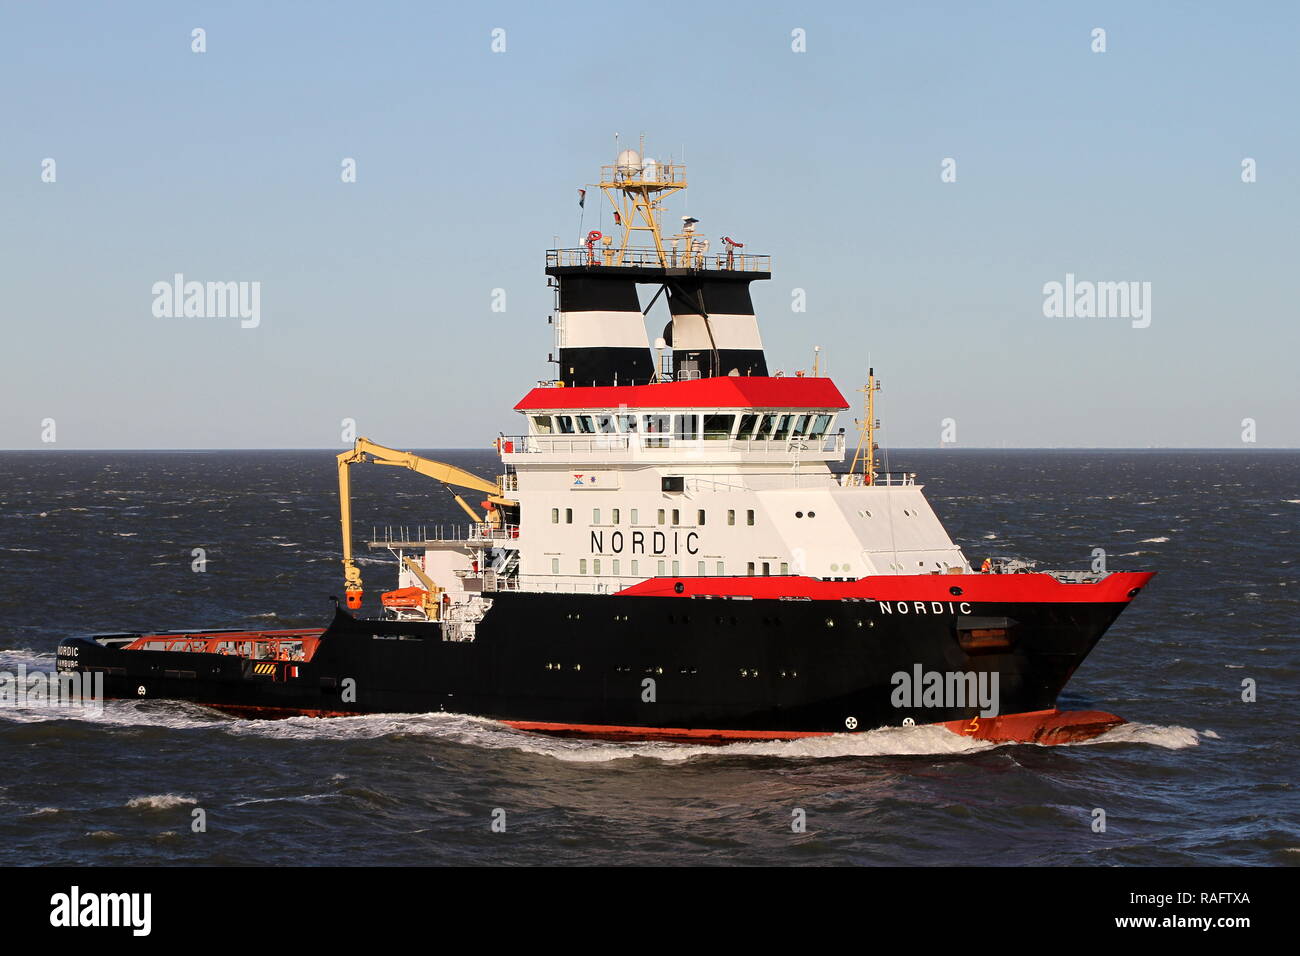 The emergency tug Nordic returns on 2 January 2019 from an emergency operation on the North Sea to Cuxhaven. Stock Photo